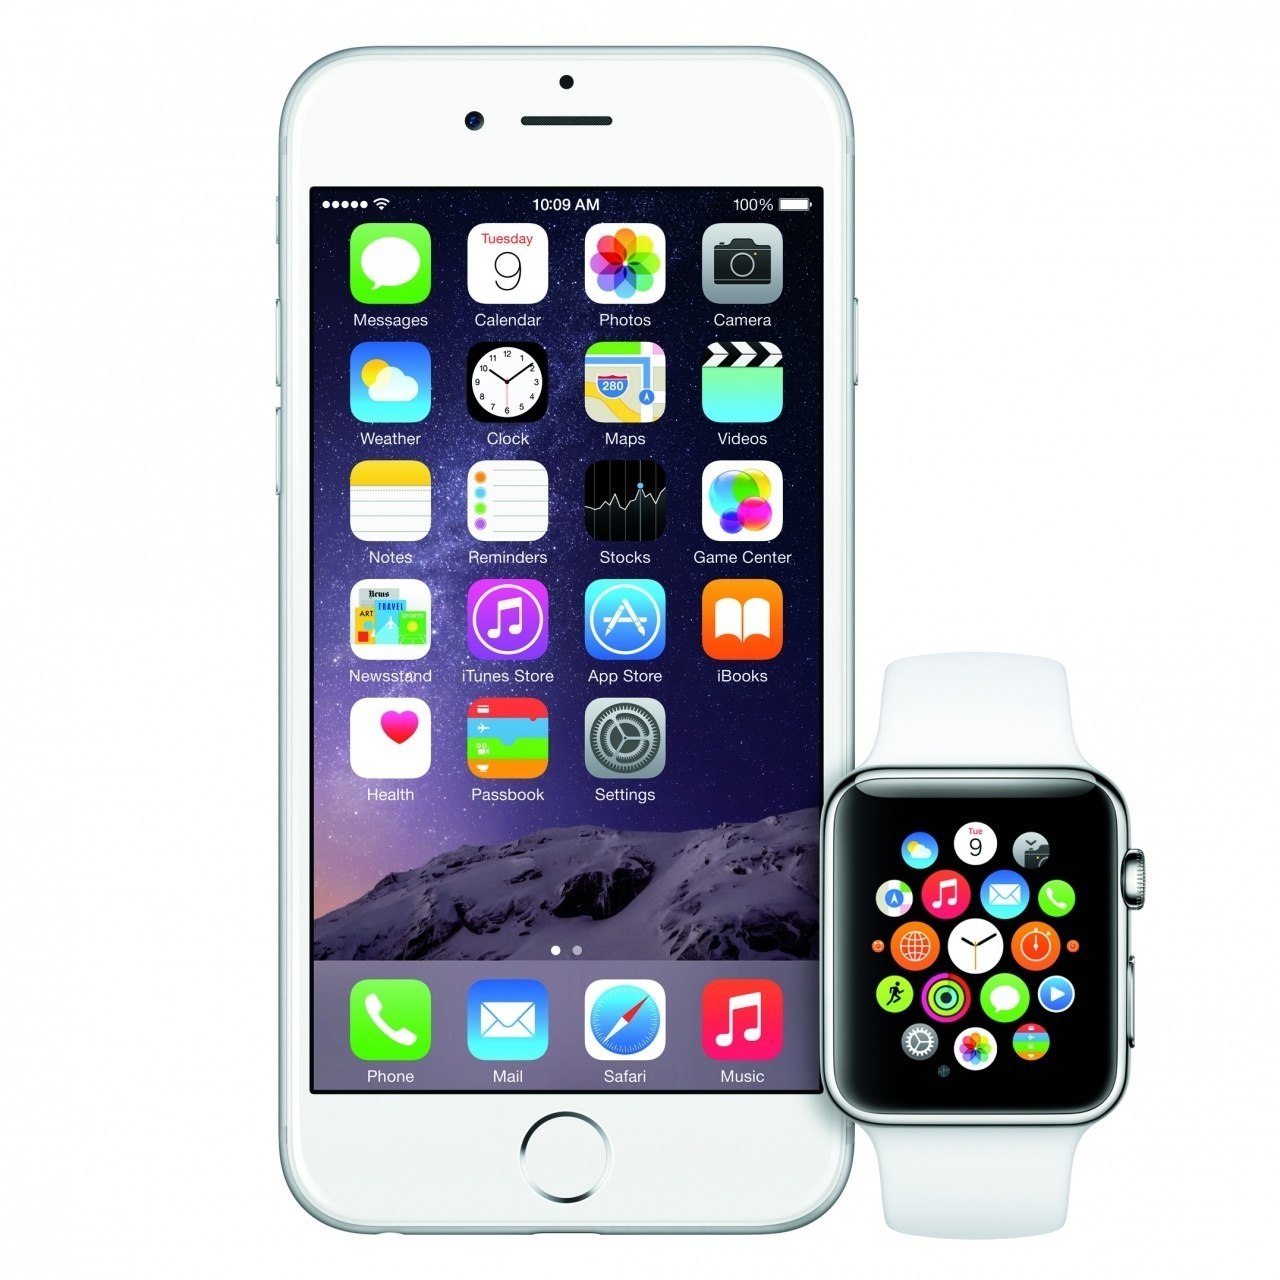 Apple Watch to Interface With Dedicated iPhone App - iHash